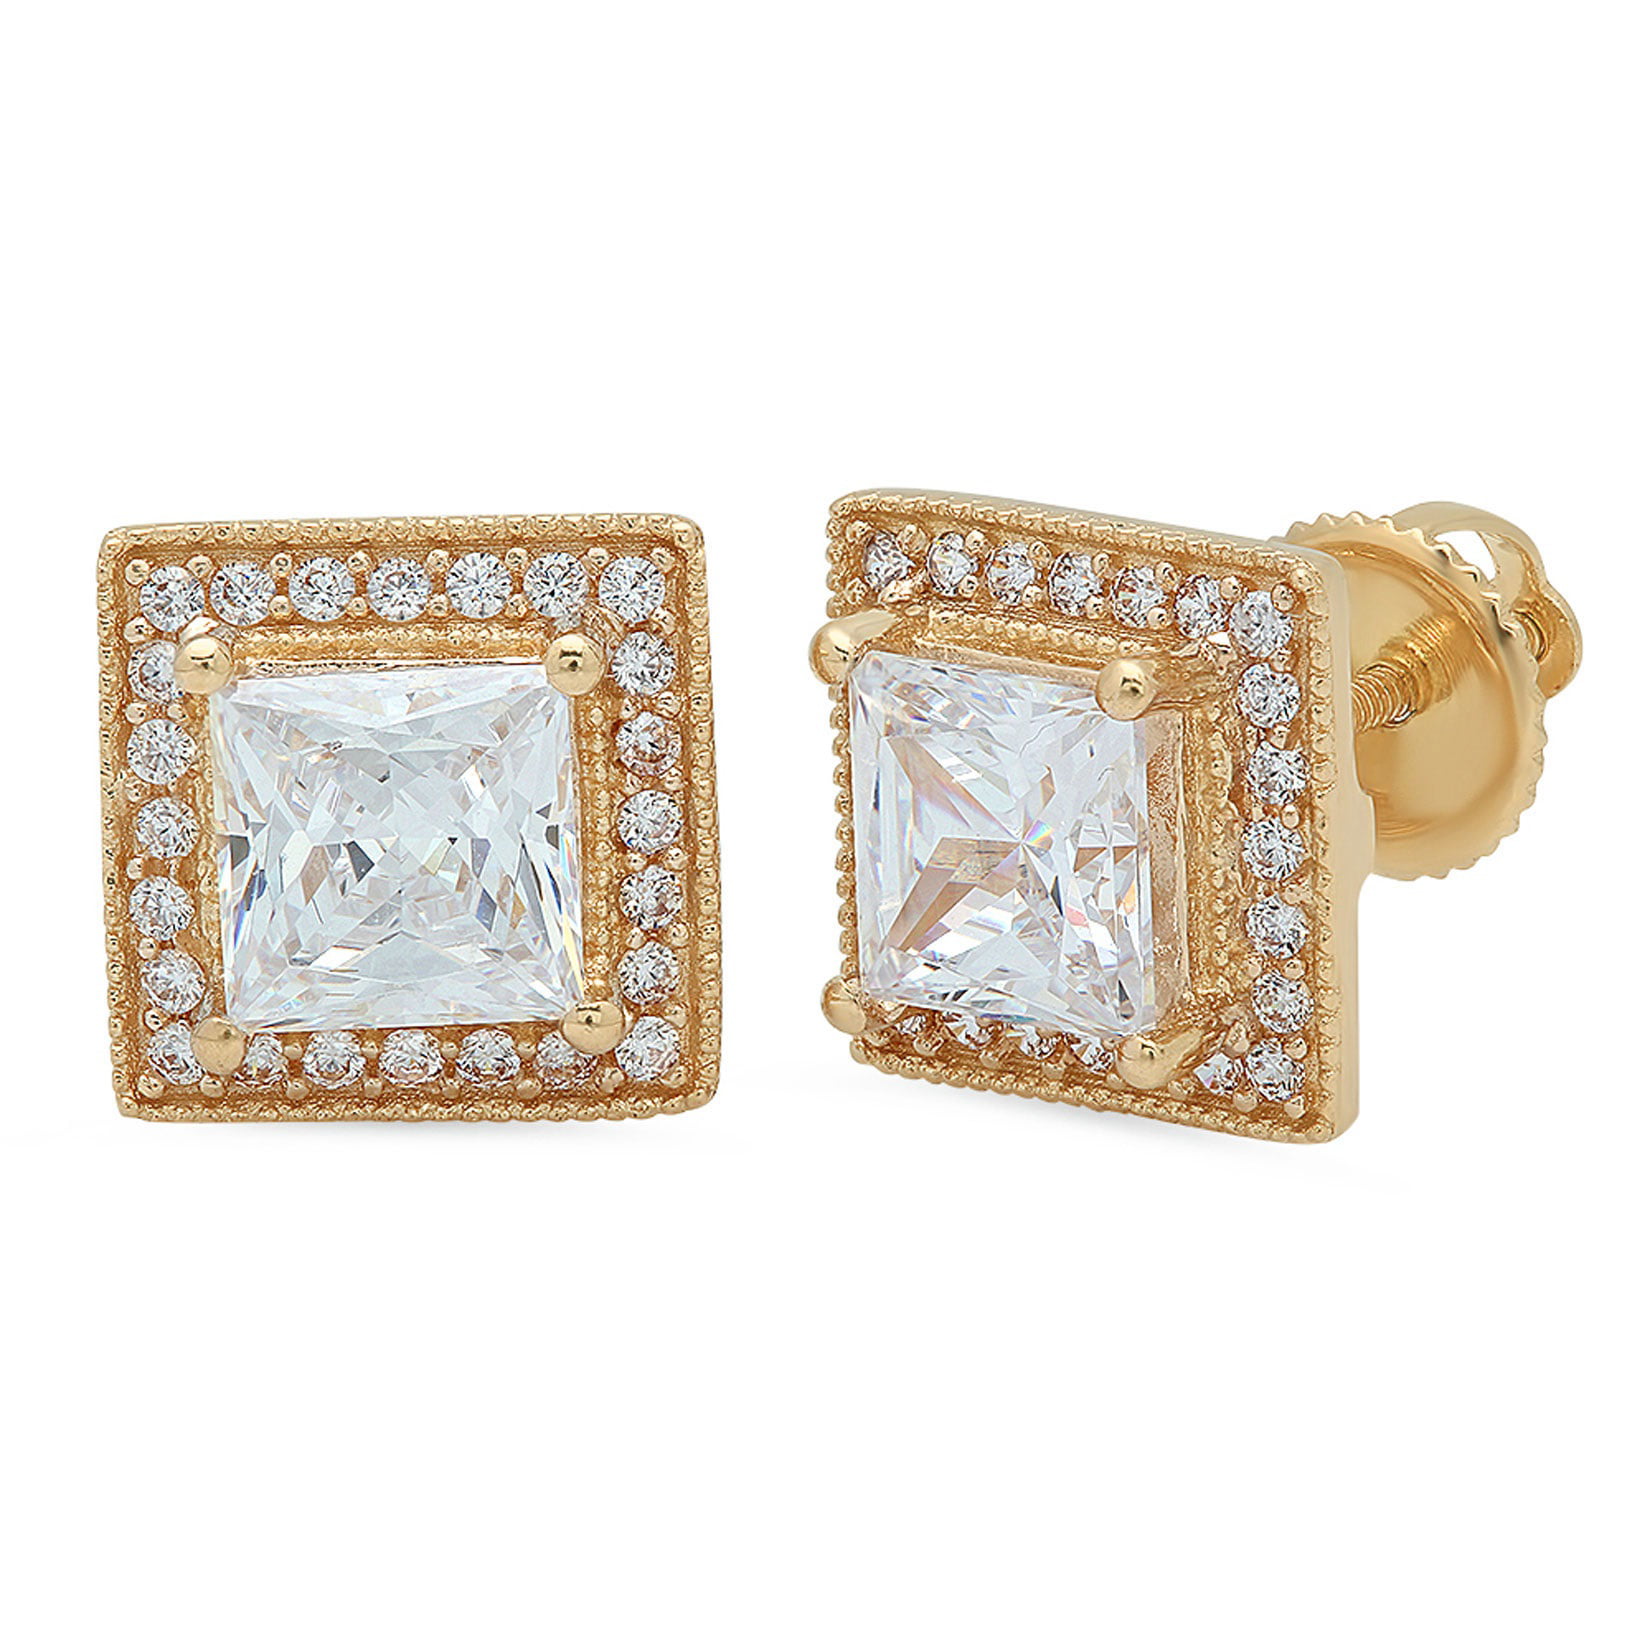 2.25 Ct Princess & Round Cut Simulated Diamond Square Shaped Halo Stud Earrings 14K Yellow Gold Plated 